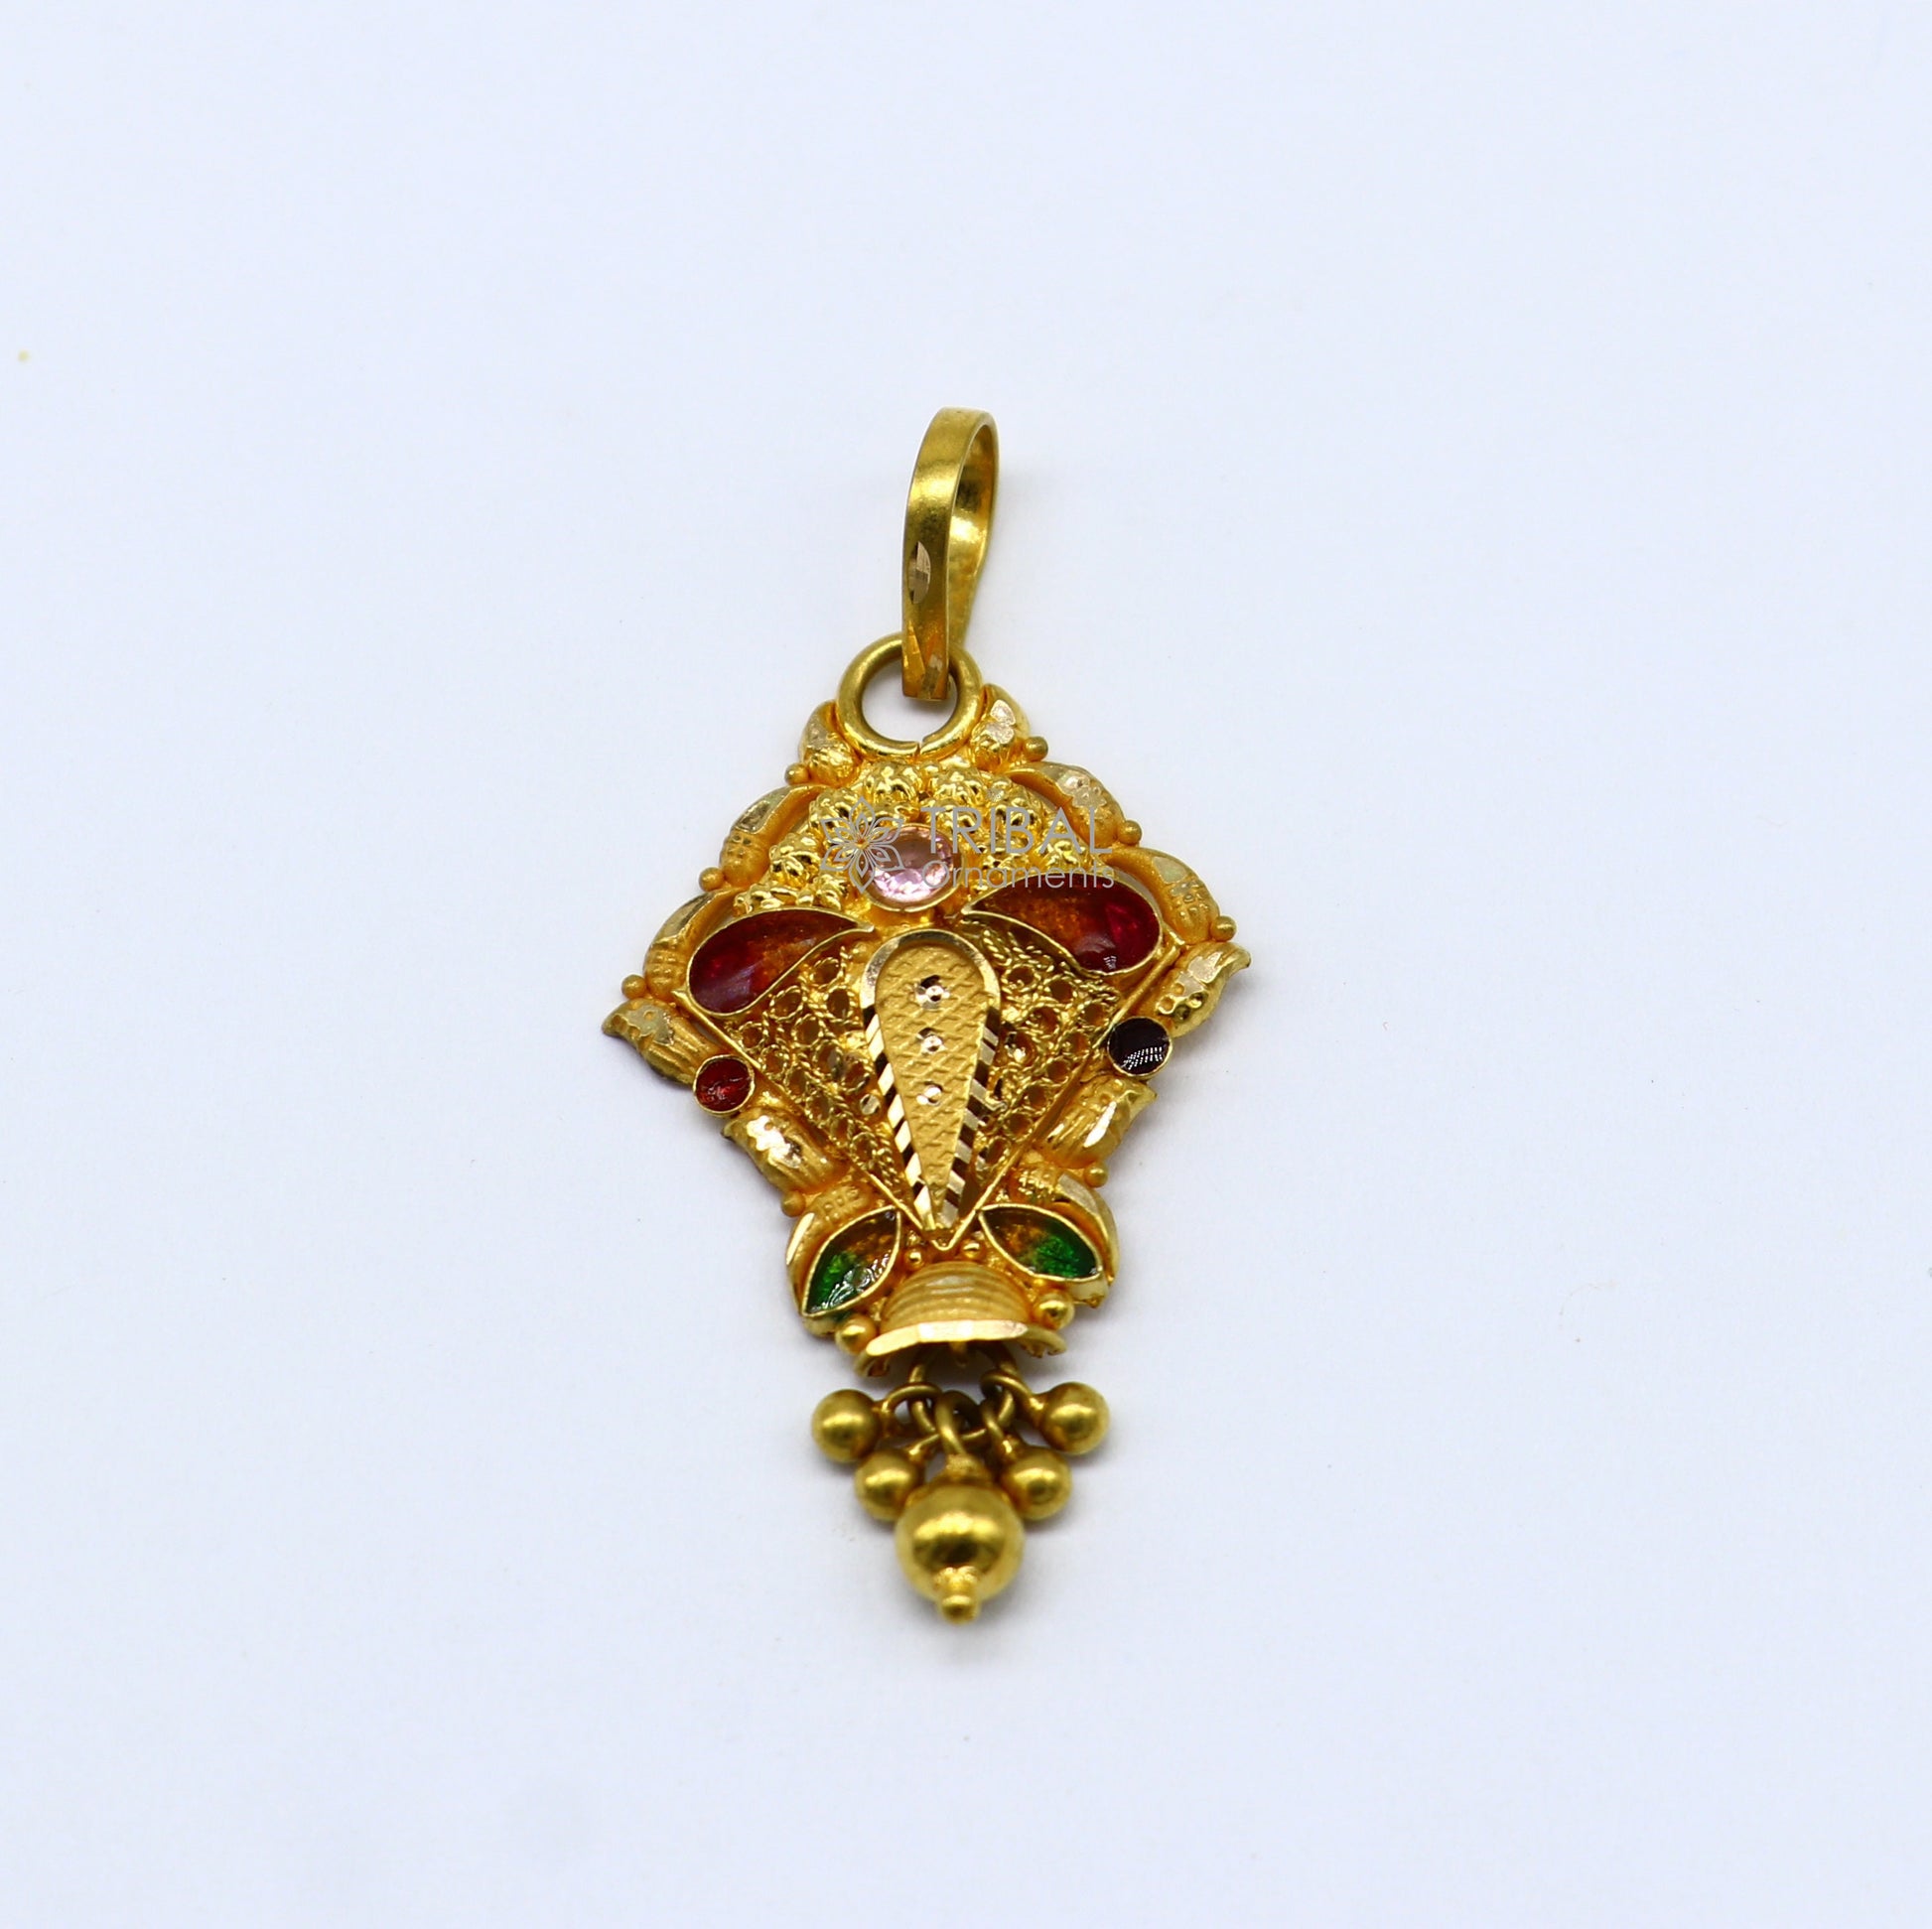 Traditional cultural filigree work trendy 22kt yellow gold functional pendant, amazing ethnic brides pendant jewelry gp28 - TRIBAL ORNAMENTS